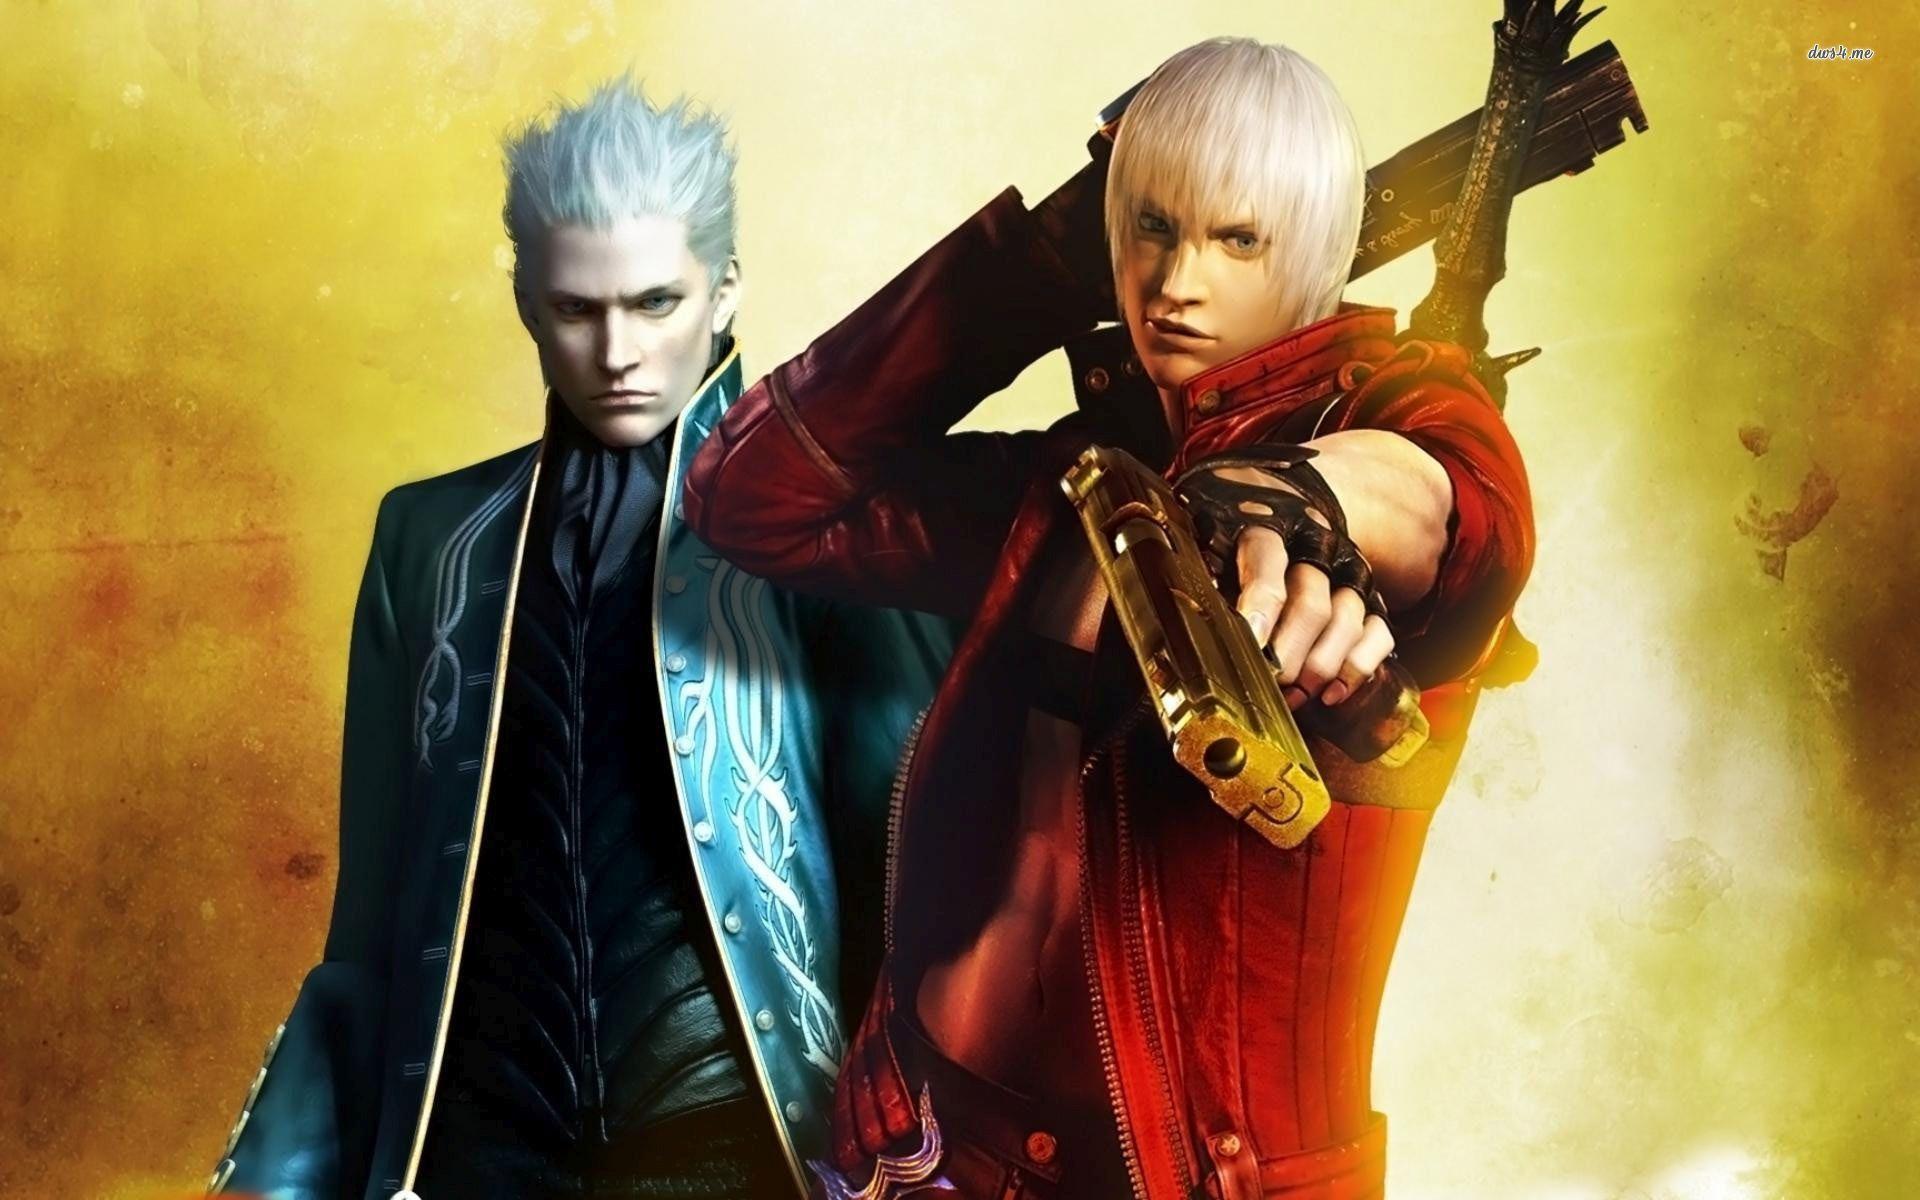 Devil May Cry 3 Wallpapers HD - Wallpaper Cave Vergil Devil May Cry 3 Wallpaper